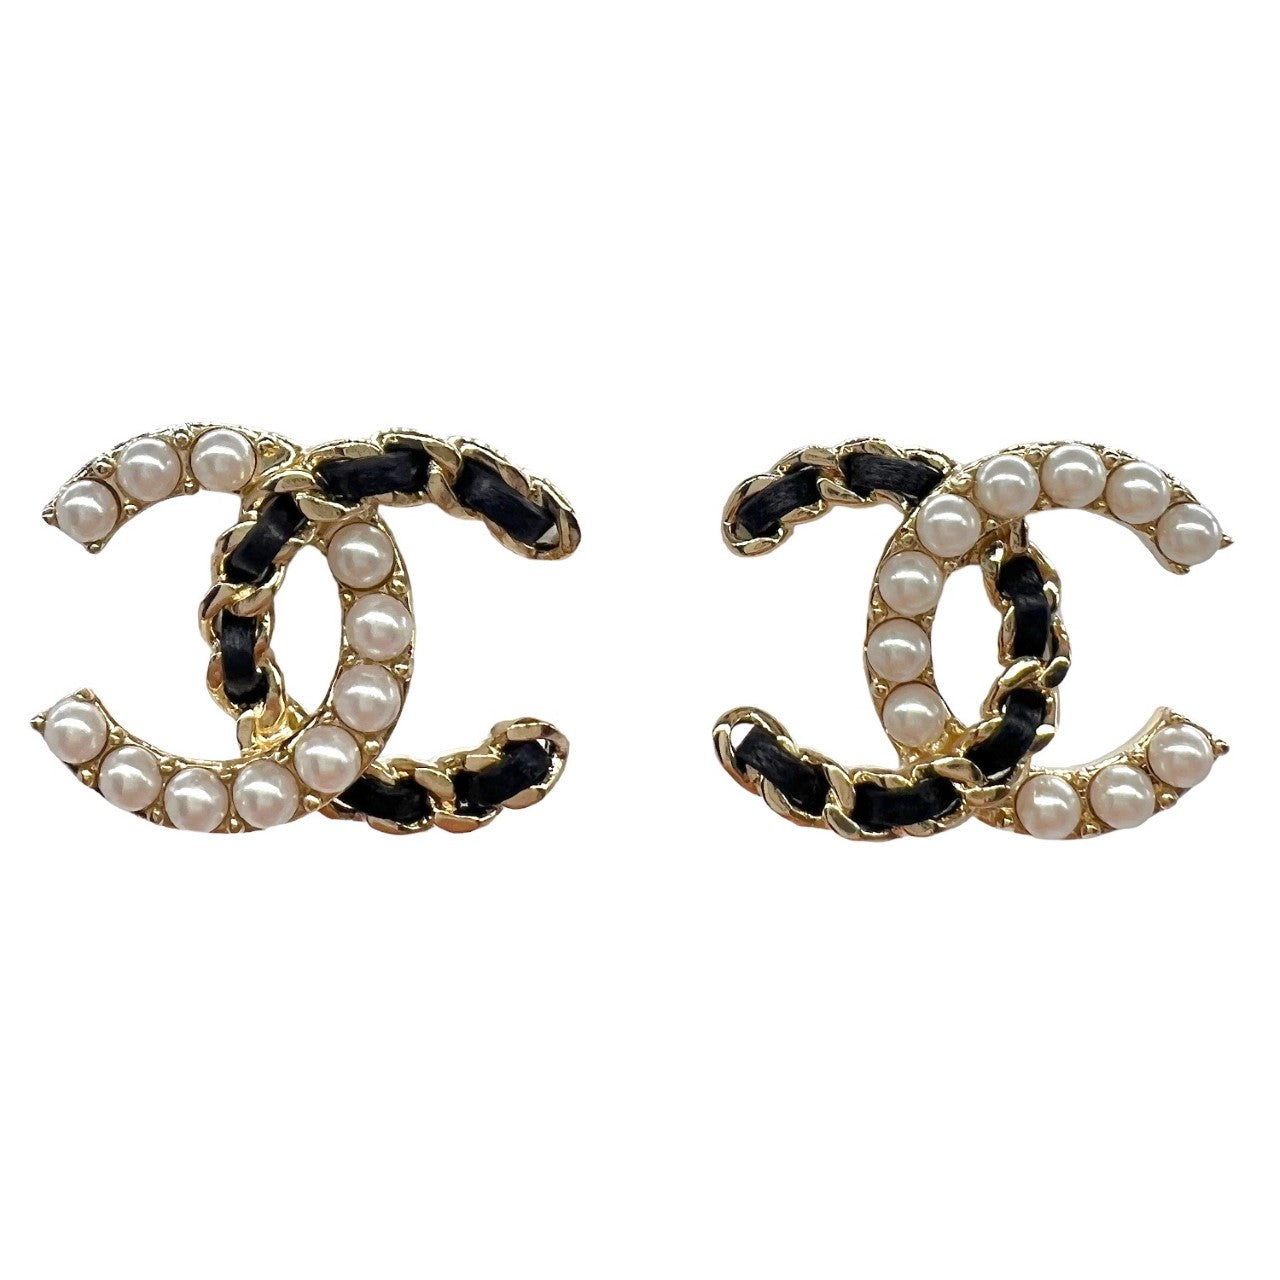 Chanel Drop CC Earrings 22K in Gold, Pearly White & Crystal